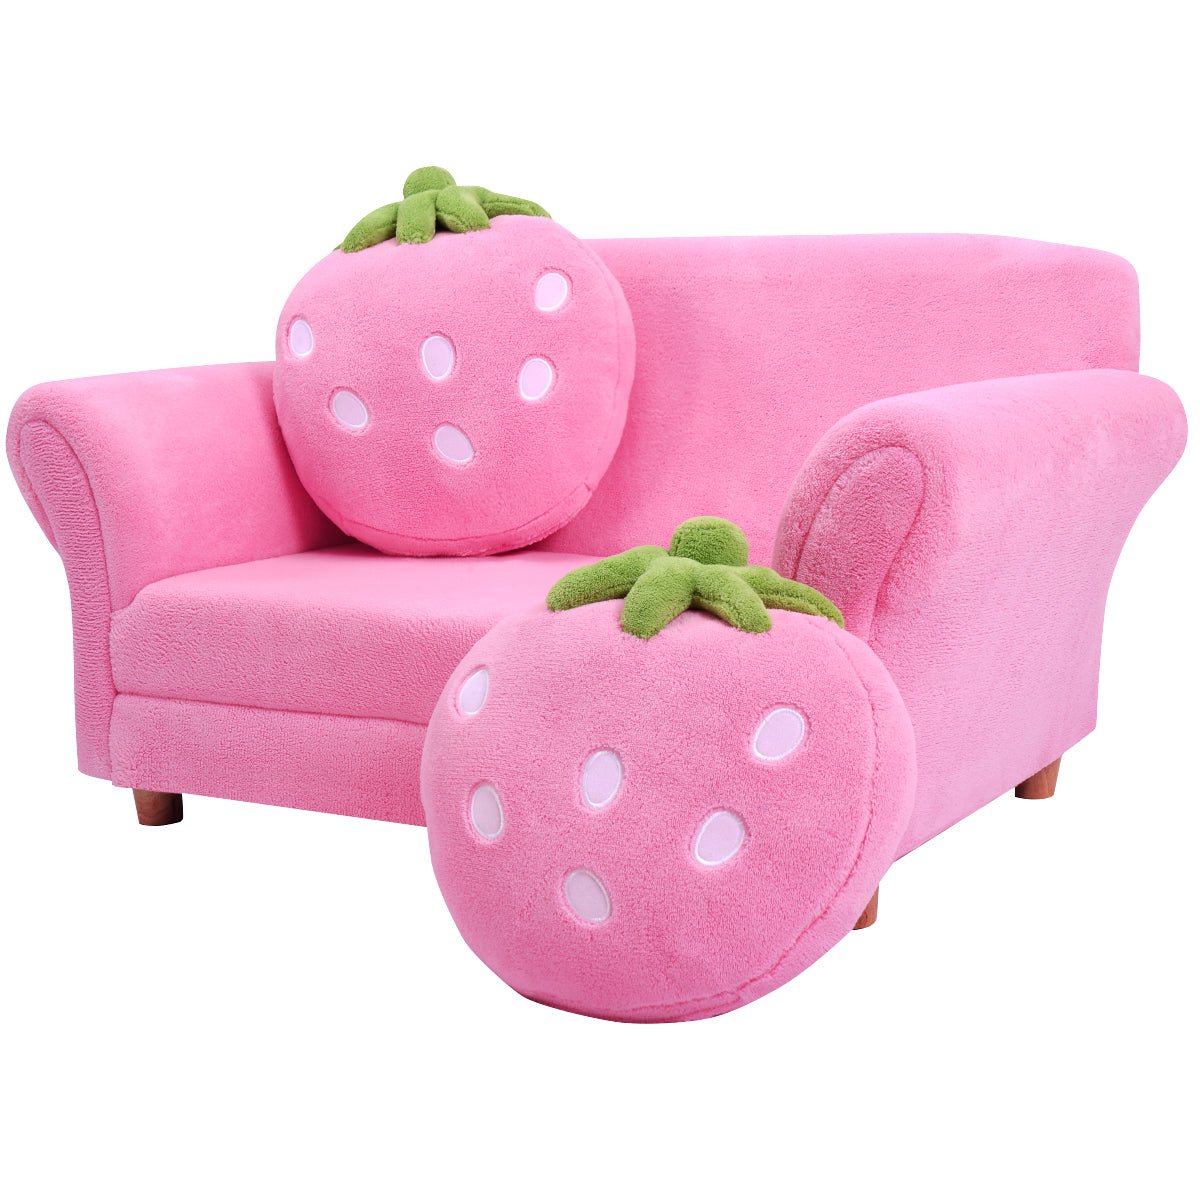 Children's 2-Seat Sofa: Lounge Bed with 2 Strawberry Pillows for Kids